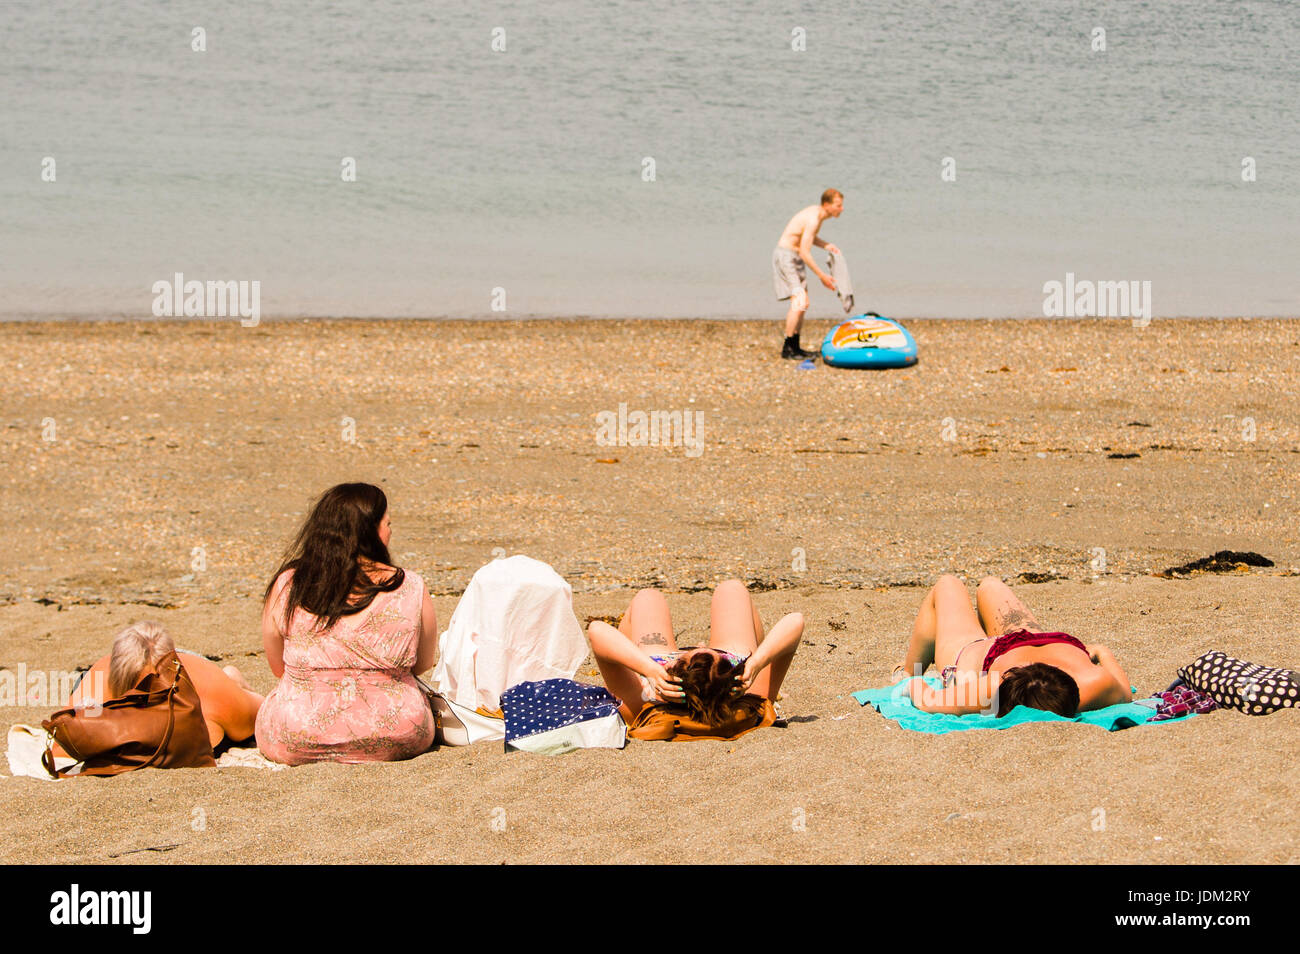 Aberystwyth Wales UK, Wednesday  21 June 2017  UK Weather:People on the beach in Aberystwyth making the most of what is expected to be the last day of the current period of hot and sultry weather as the mini heat-wave continues today  over the British Isles.    The Met Office has warned of heavy rain and thunderstorms with the chance of localized flooding affecting much of the UK in the next 24 hours as the weather system starts to break down after many days of record hight temperatures  ©keith morris / Alamy Live News Stock Photo